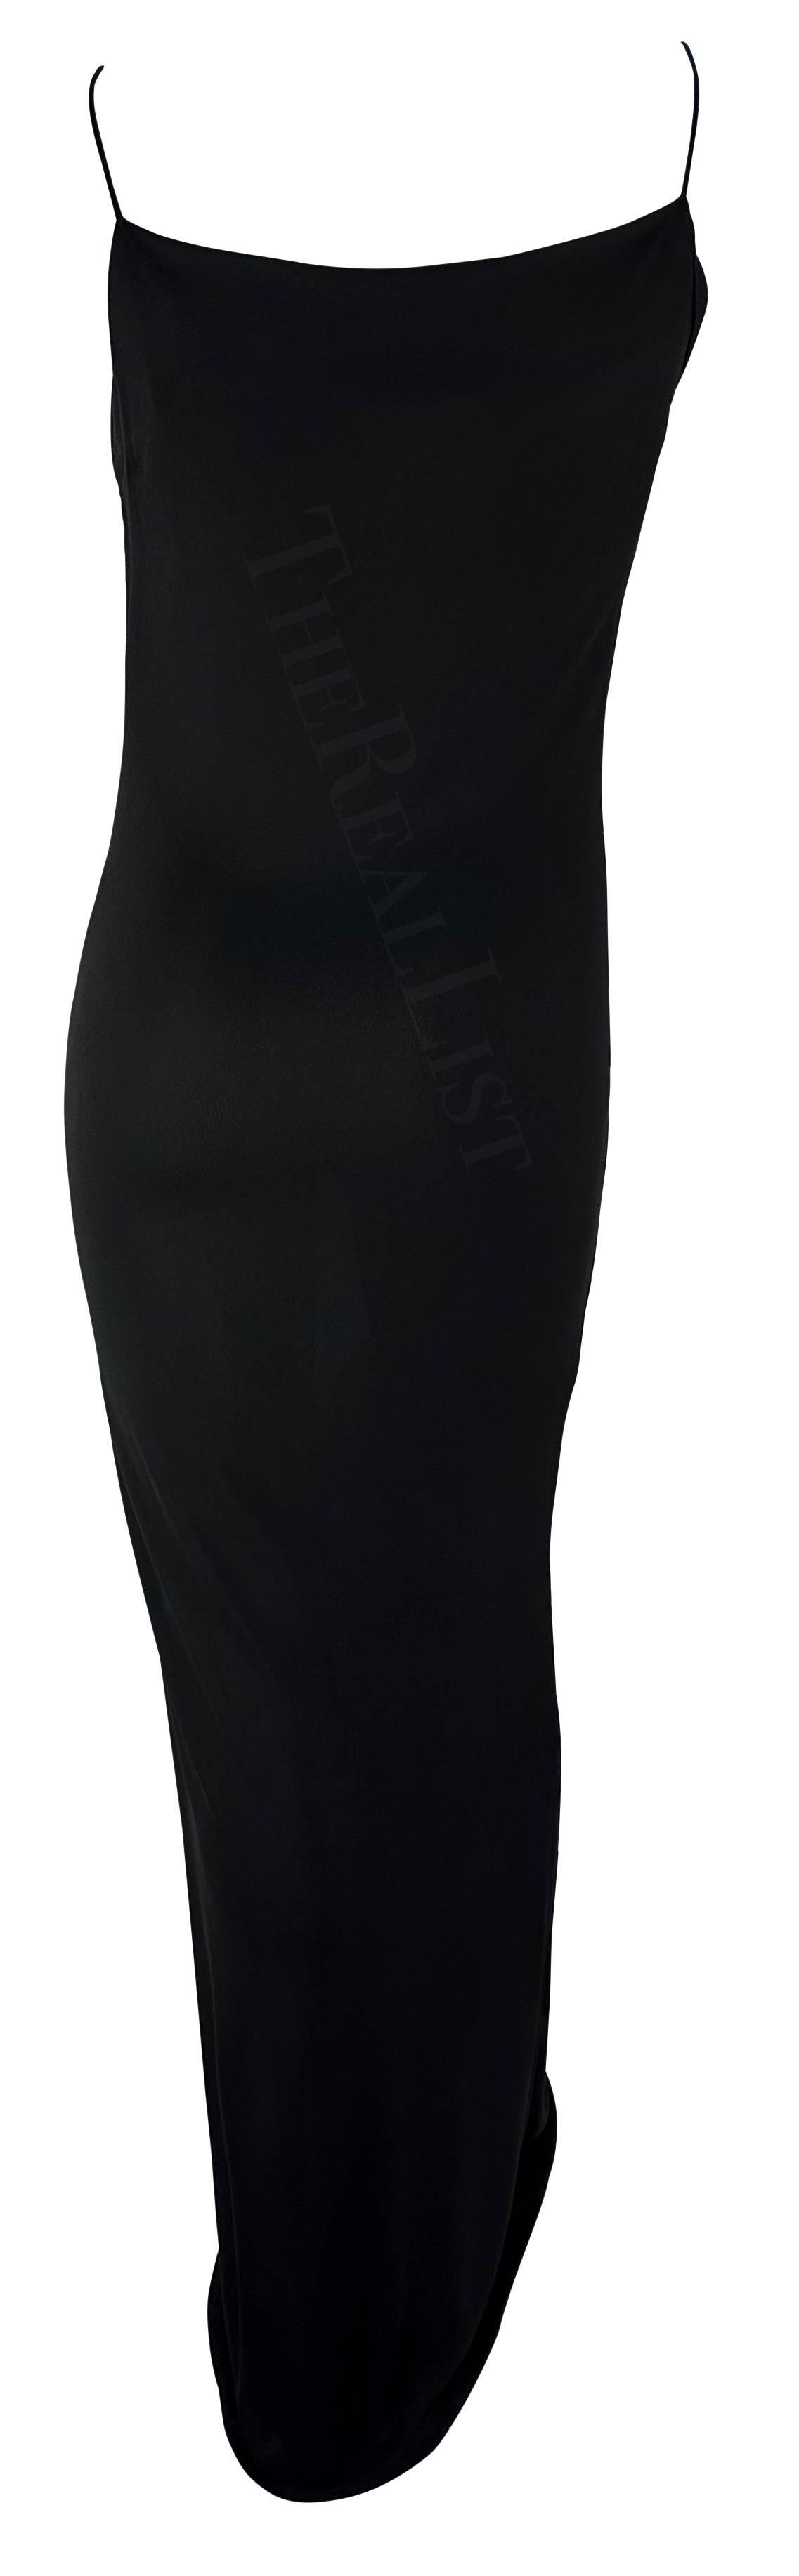 S/S 1997 Gucci by Tom Ford Plunging Cowl Black Slip Bodycon Gown  For Sale 2